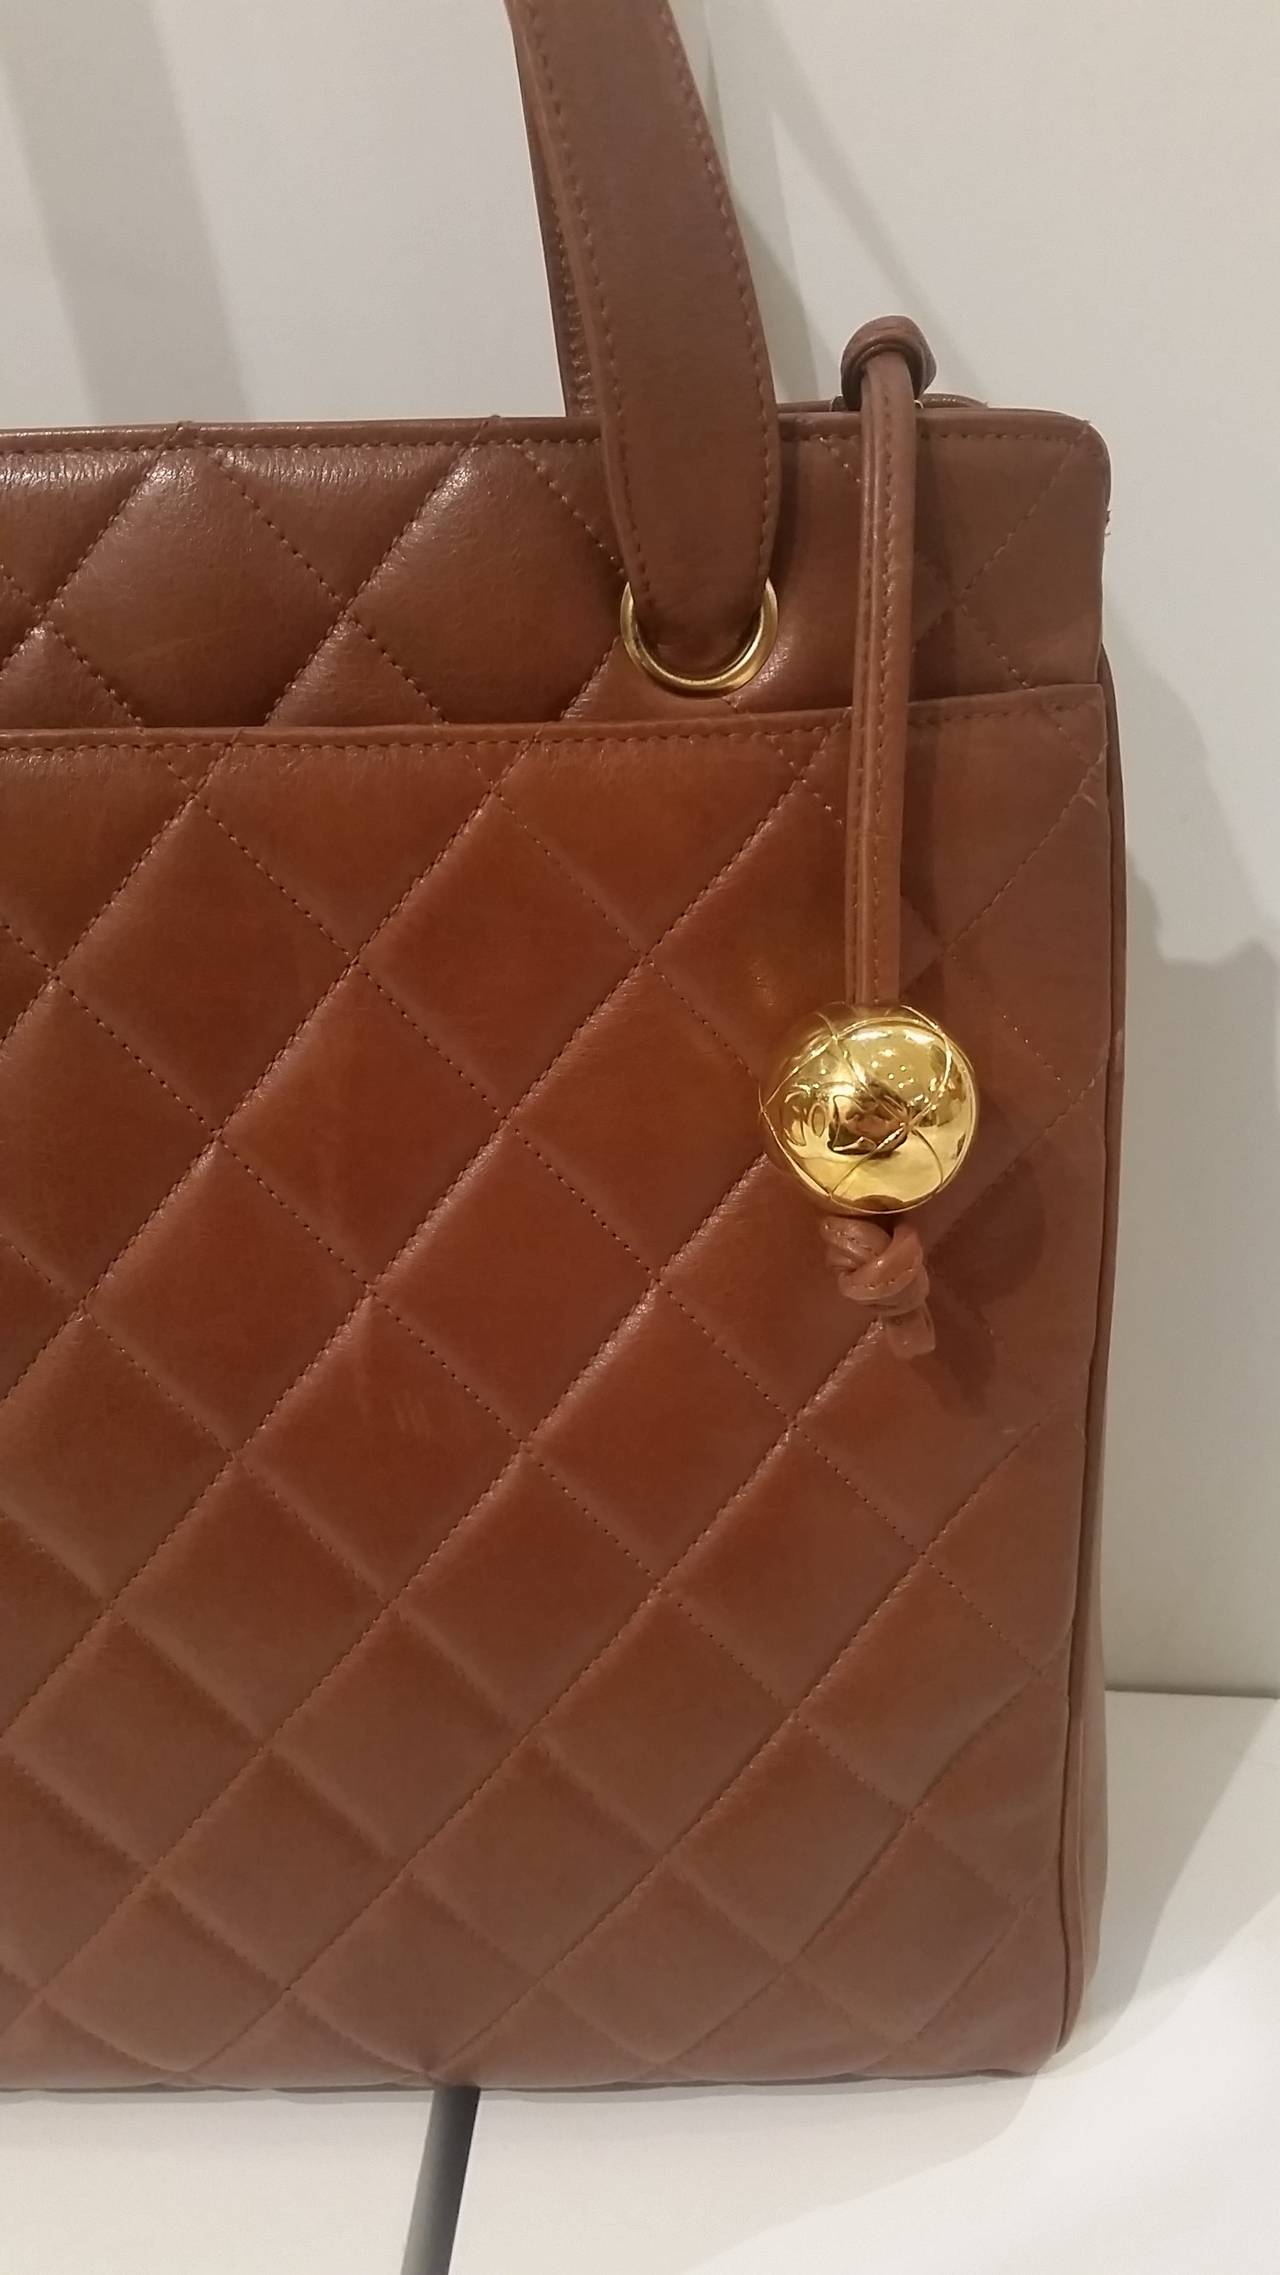 1991- 1994 s Chanel brown leather bag
Very rare and hard to find Chanel vintage bag with gold double CC ball on the zip! Lamb skin in really good condition